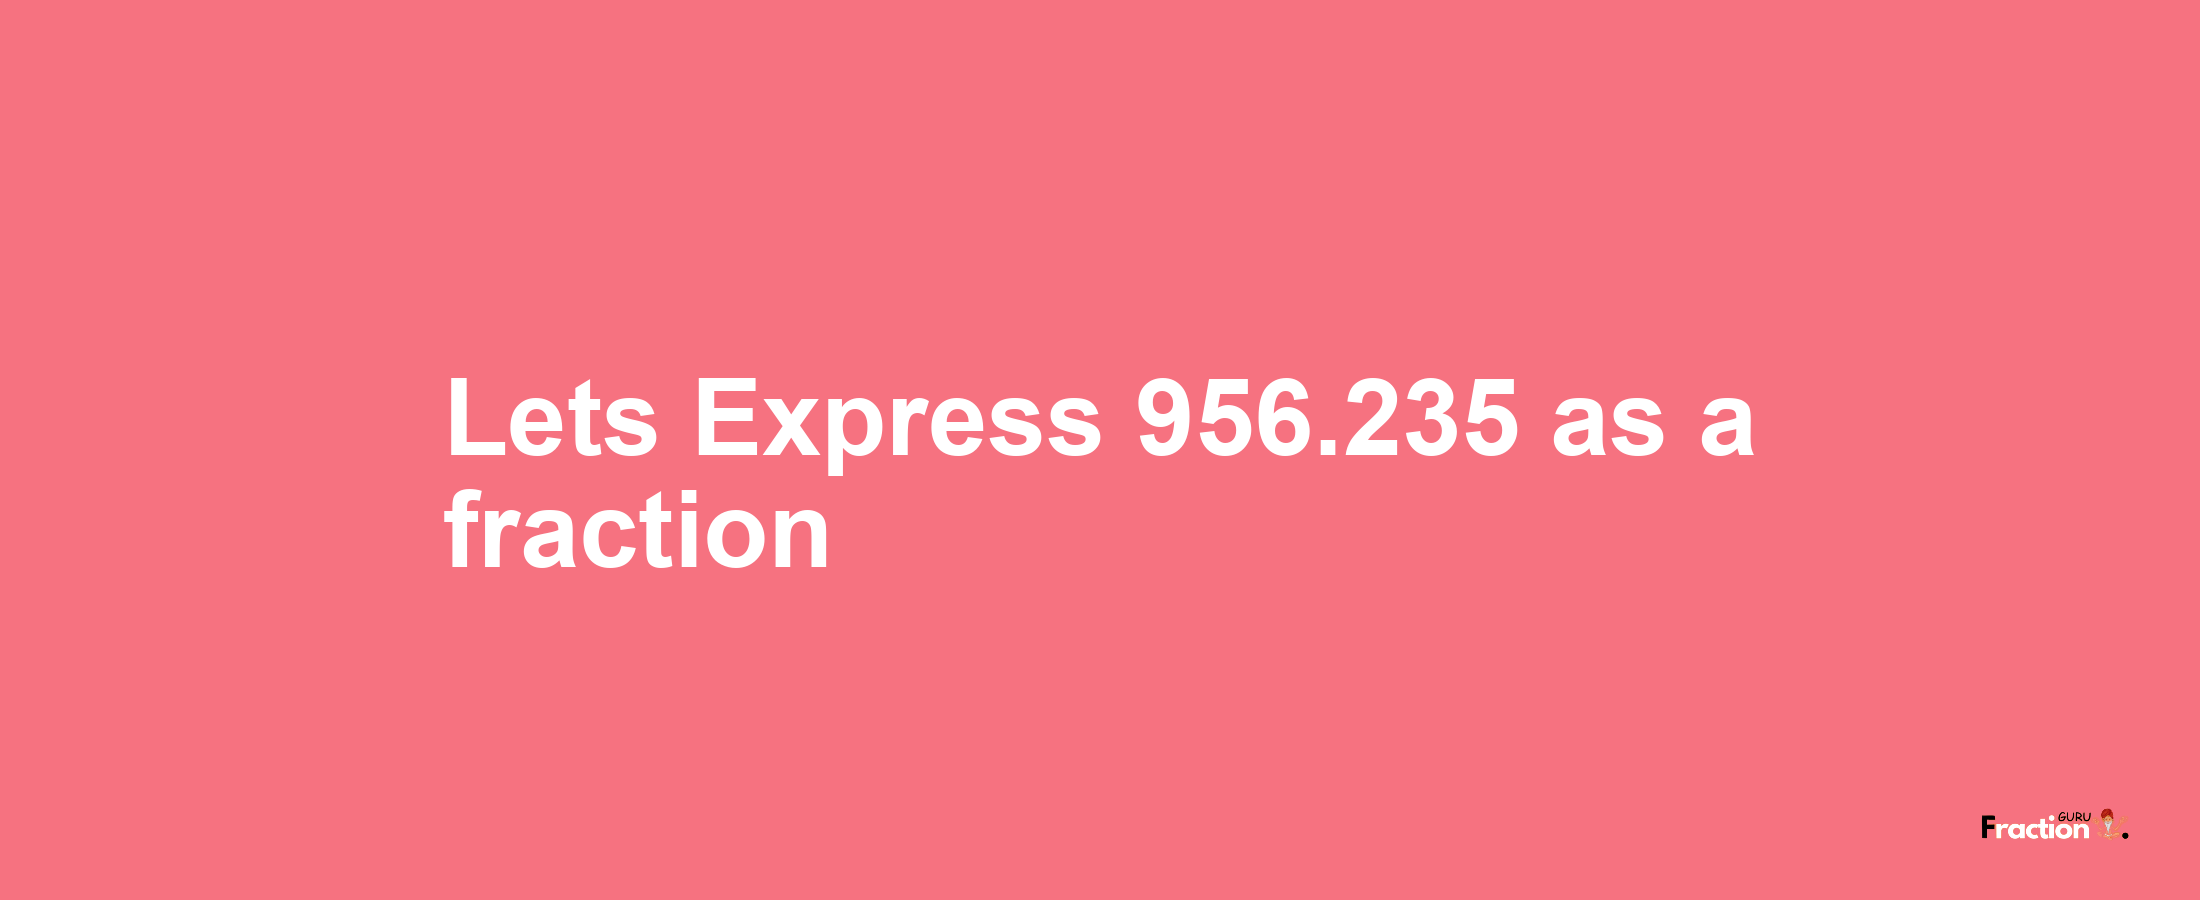 Lets Express 956.235 as afraction